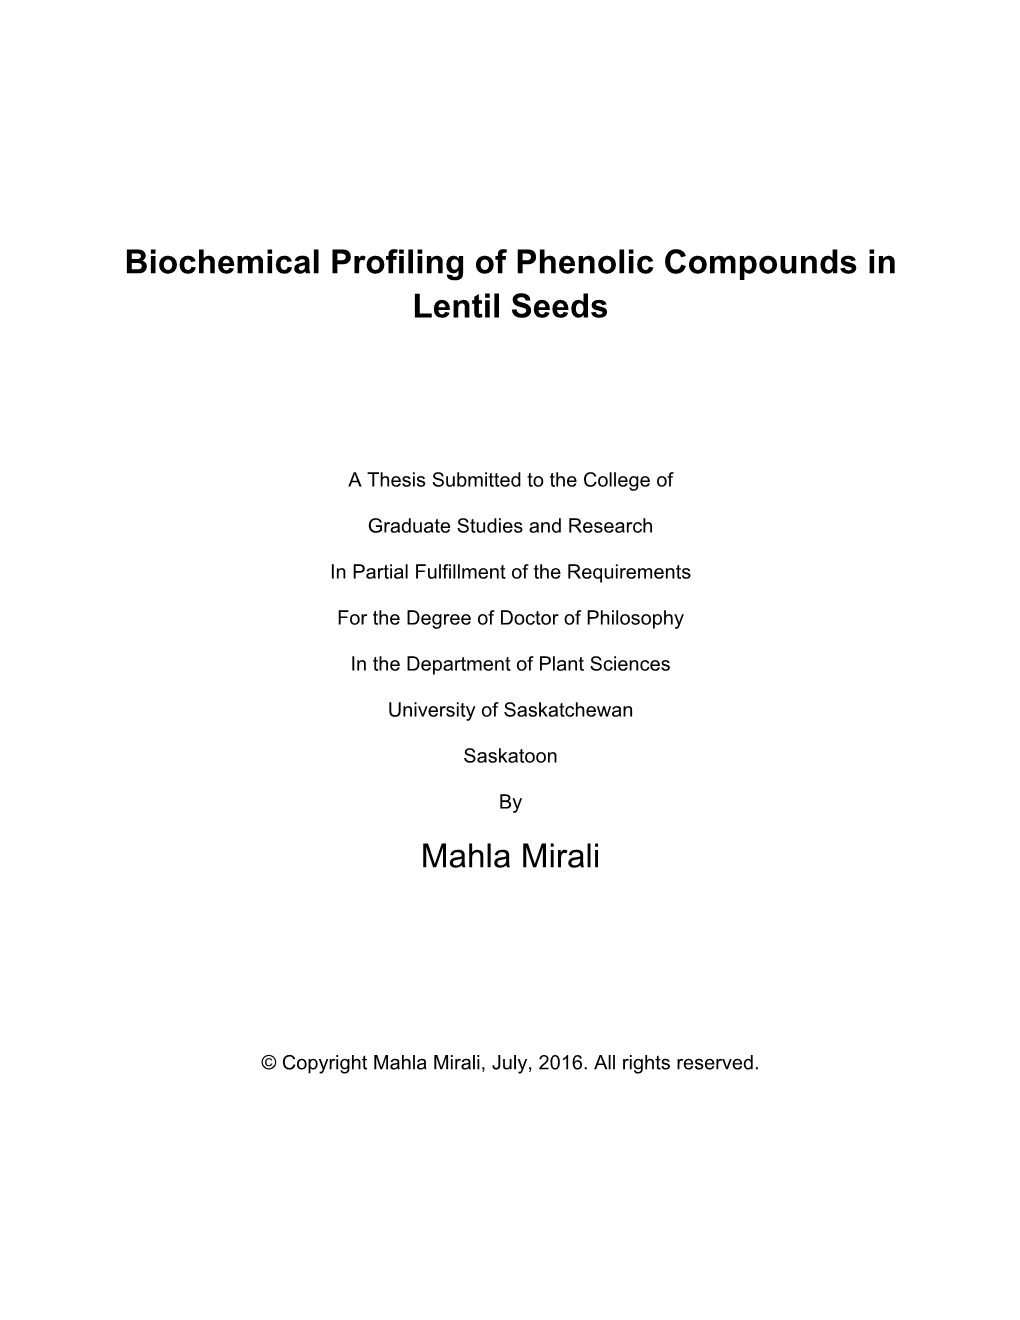 Biochemical Profiling of Phenolic Compounds in Lentil Seeds